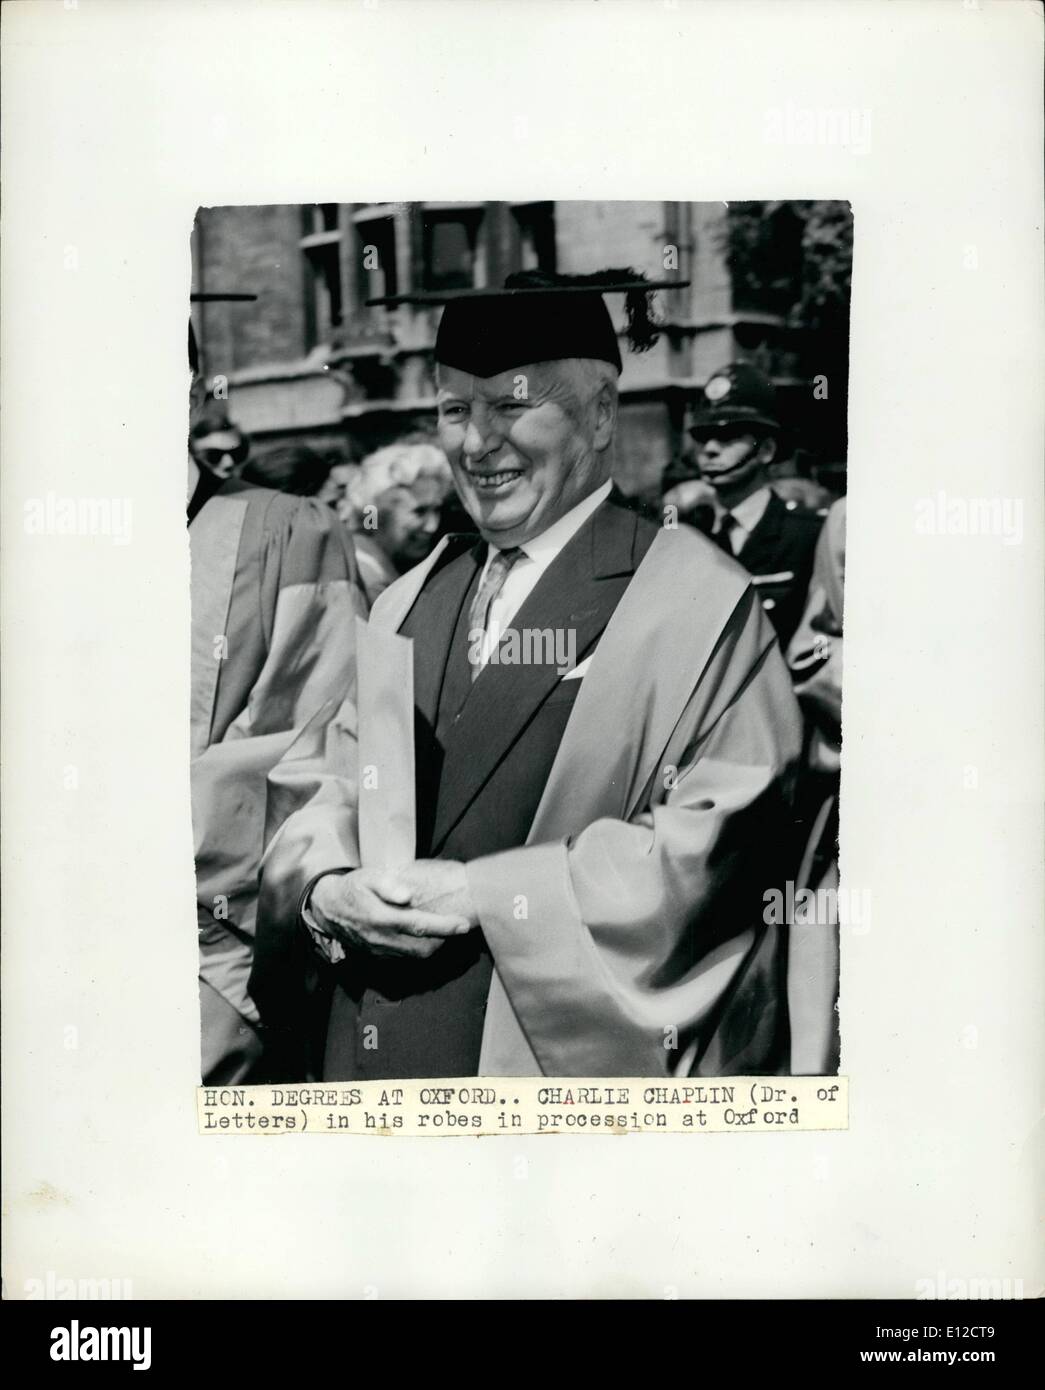 Dec. 19, 2011 - Honorary Degree at Oxford, Charlie Chaplin (Dr. of Letters) in his robes in procession at Oxford. Stock Photo